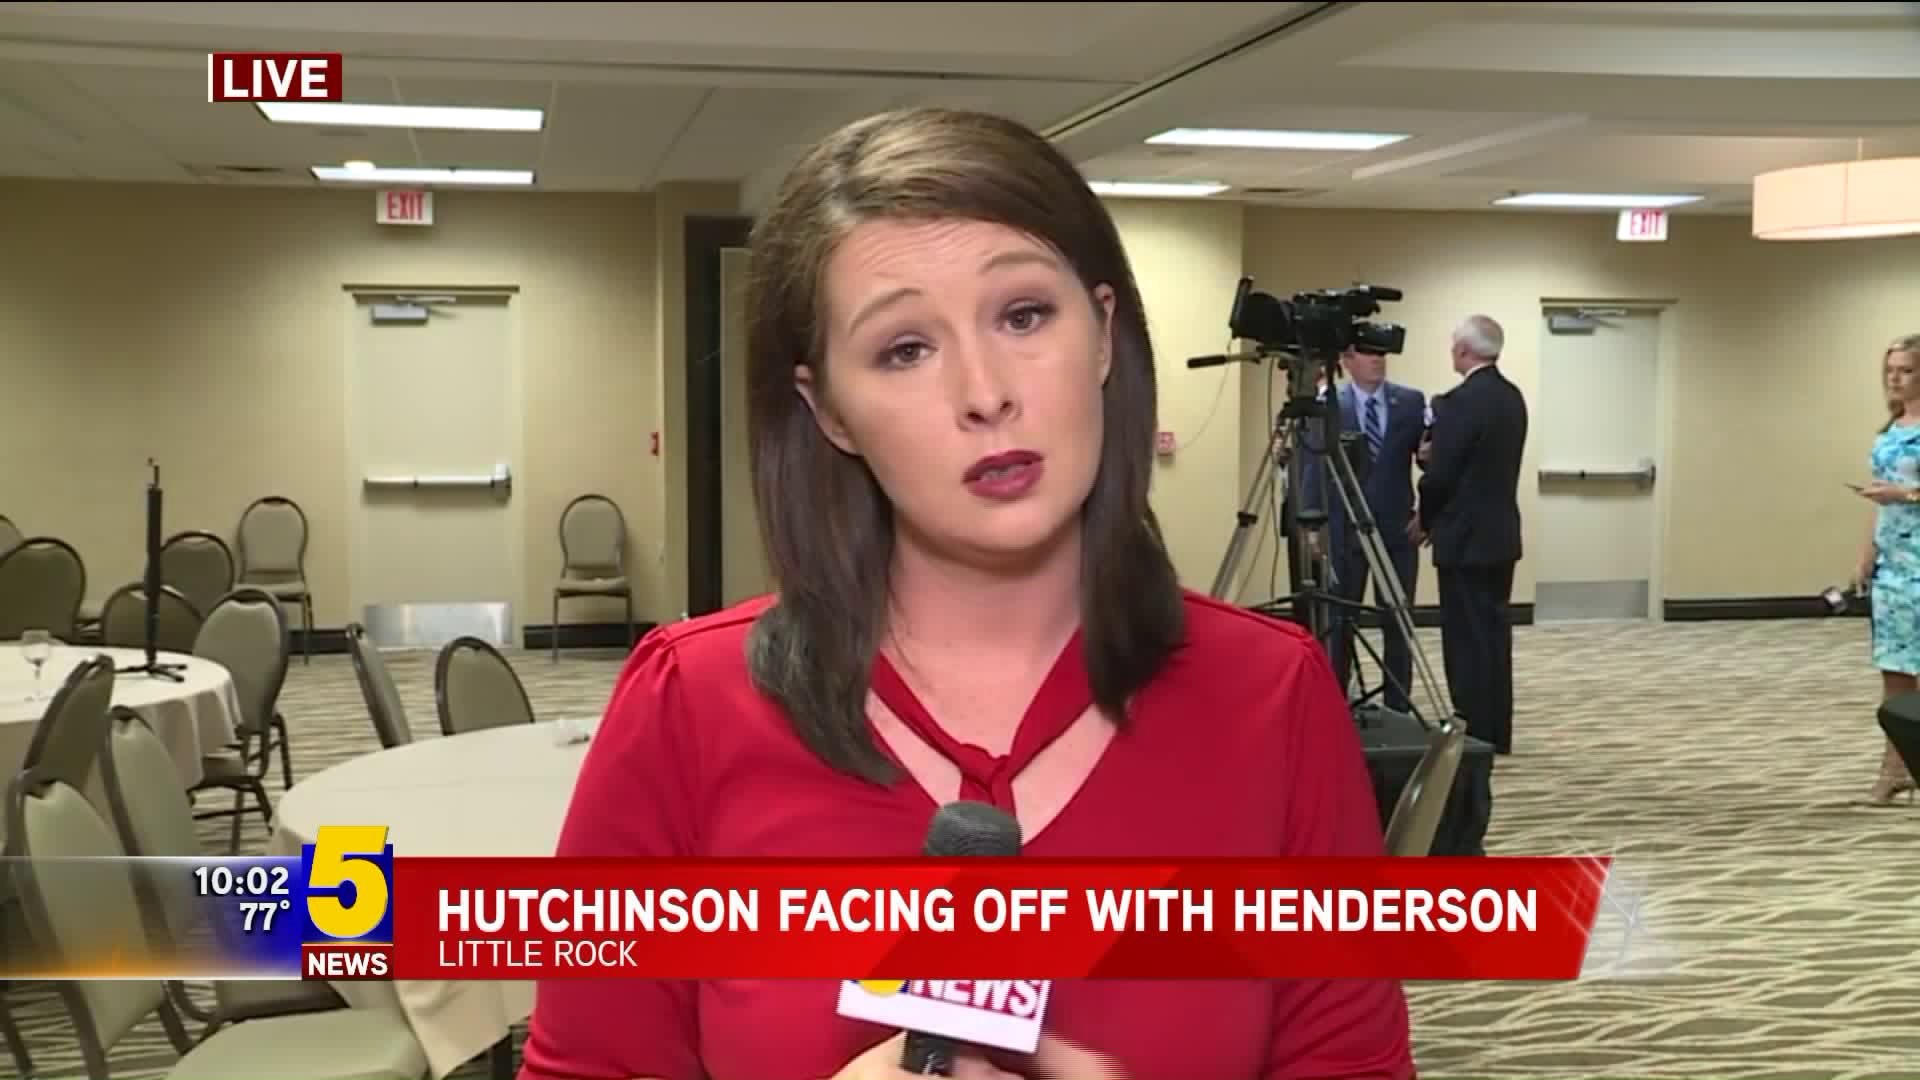 Hutchinson To Face Off With Henderson